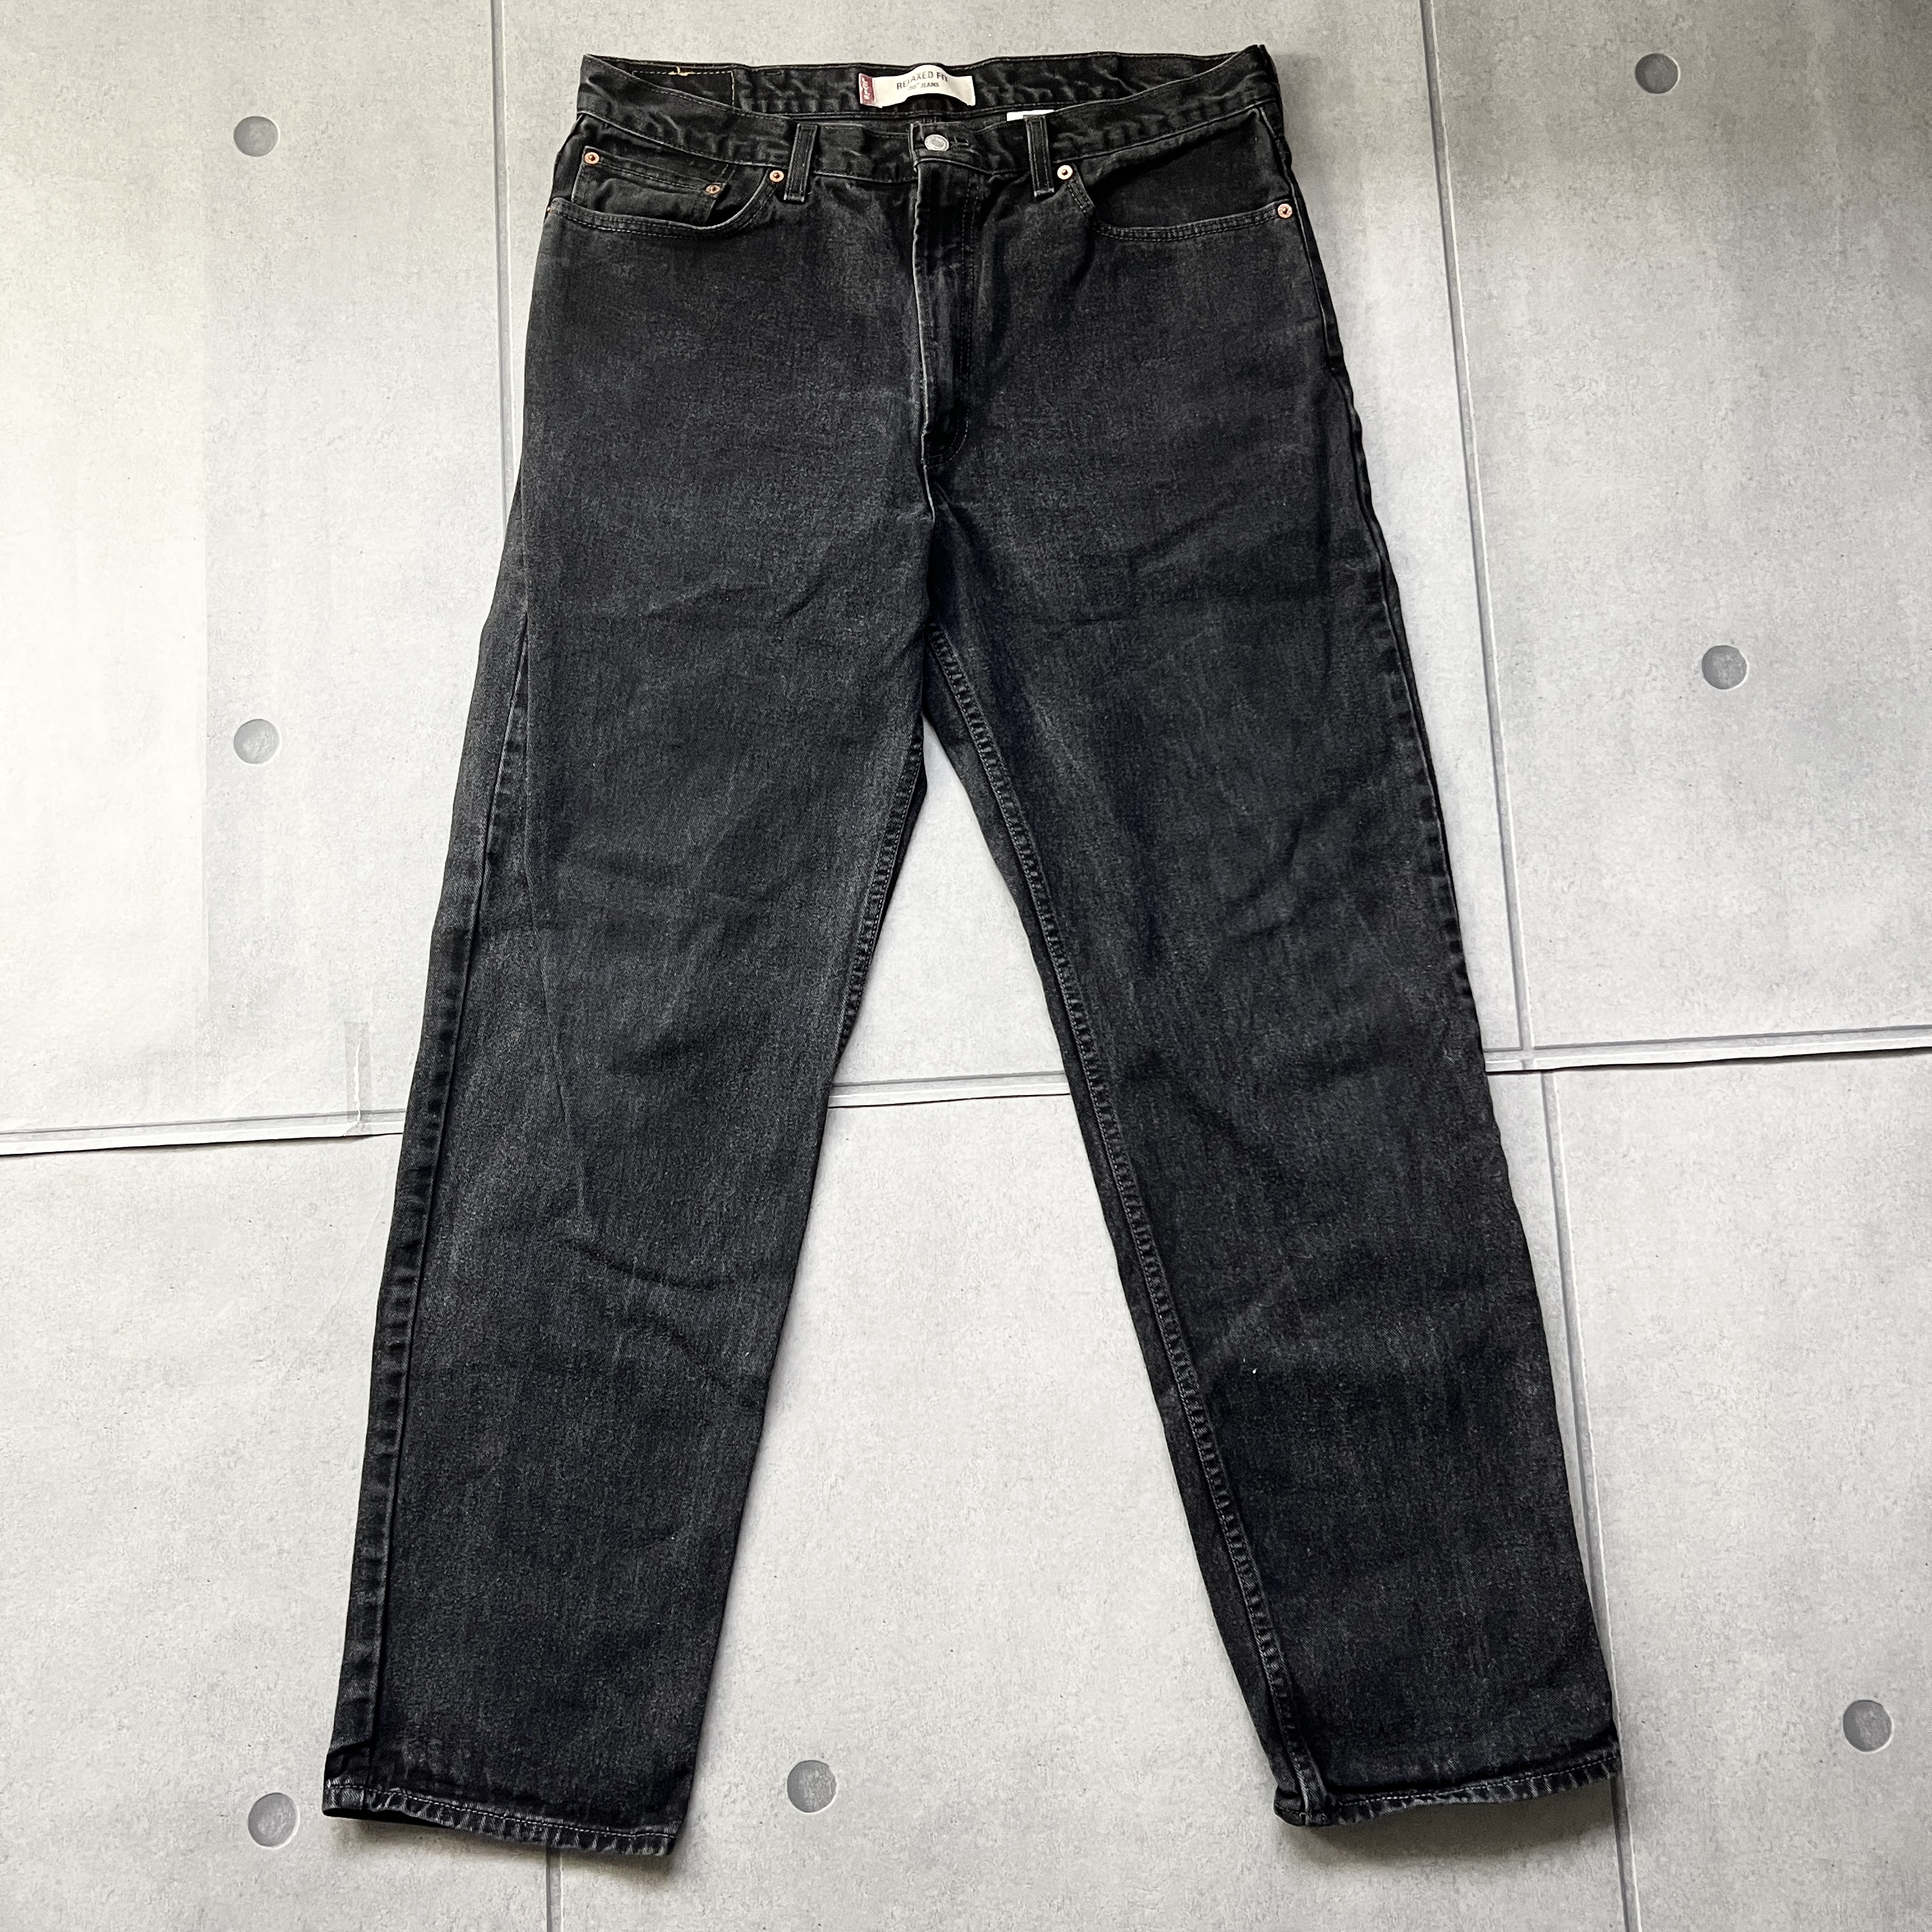 Levi's550 RELAXED FIT リーバイス550 ブラックデニム ジーパン